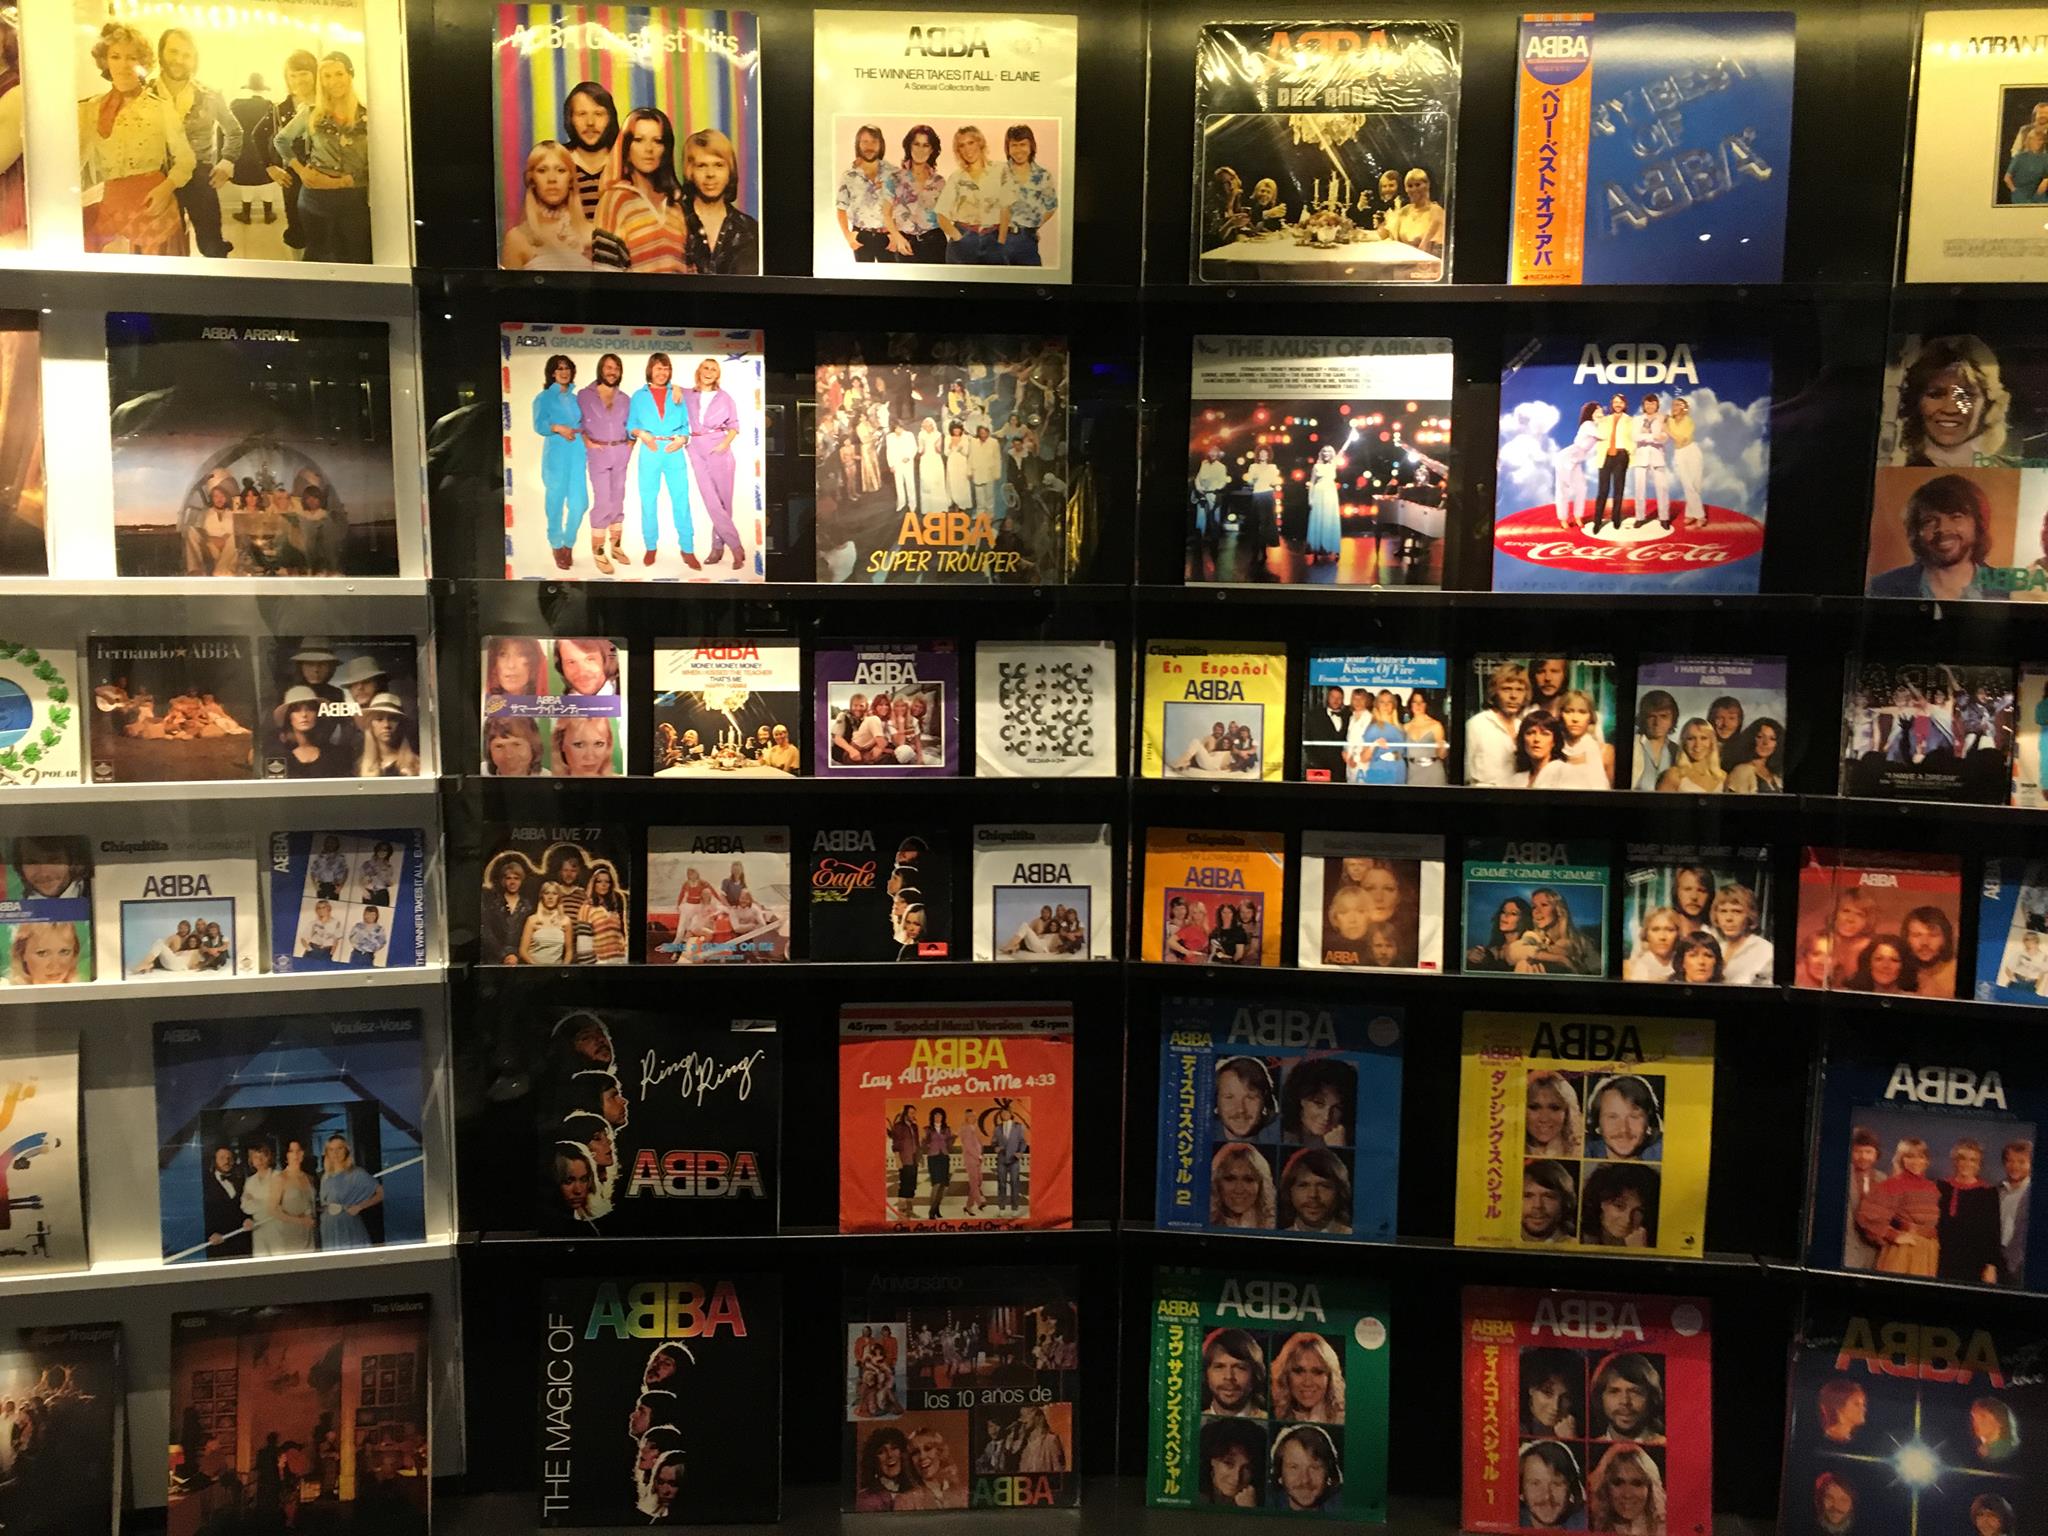 ABBA Museum Stockholm